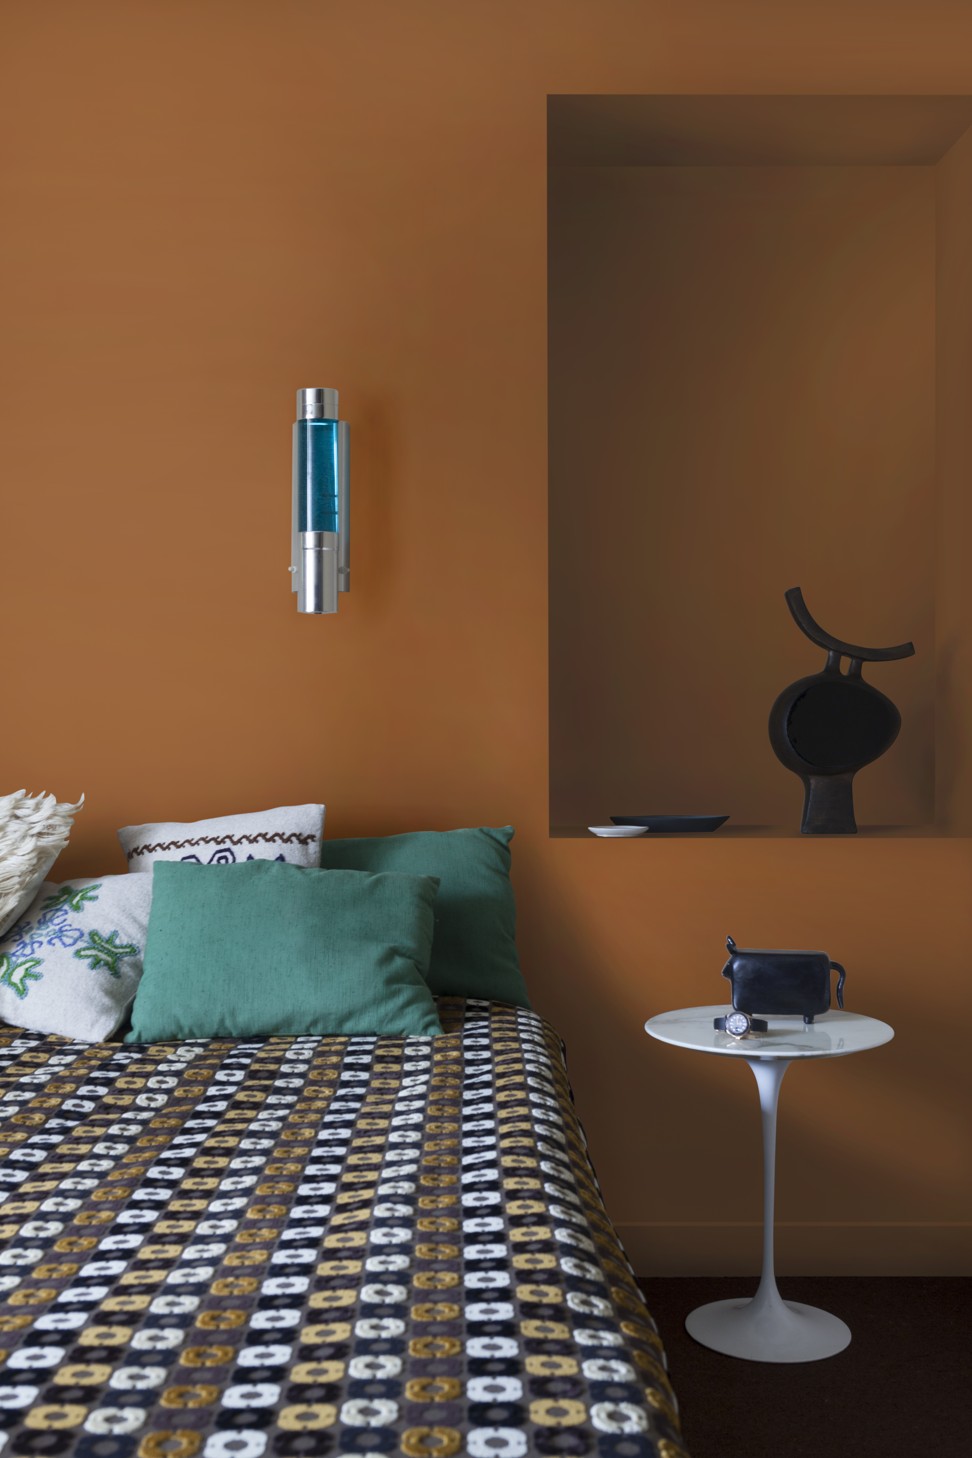 This bedroom has a strong 1970s vibe to it, with the orange and brown hues, the plastic Copenhagen lamp and the strong graphic lines on the bedspread and carpet.